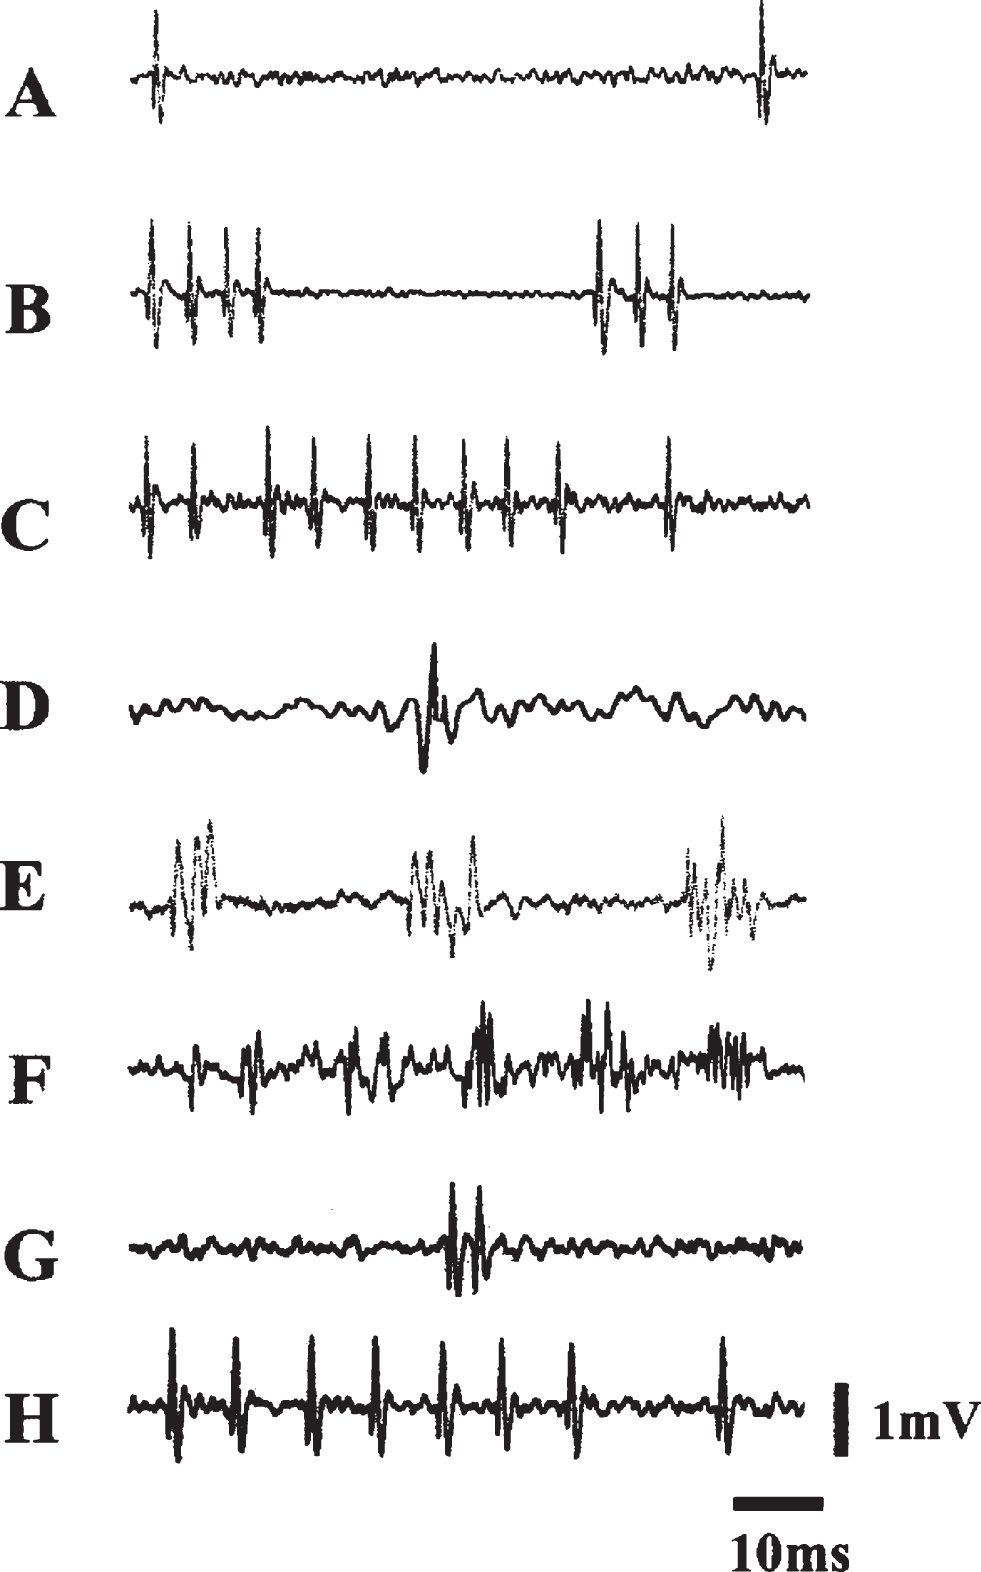 Electrophysiological Activities Over the Course of 99 Days Postlesion. Samples of spontaneous electrical activity in VMN before and after lesions. (A), (B), and (C) were recorded from VMN before lesions: (A) A slow and irregular discharge pattern; (B) a phasic firing pattern; (C) a fast firing pattern. (D–H) were recorded after lesions: (D) was recorded at 42 days postlesion; (E) was recorded 64 days postlesion. Note that (D) and (E) lack complete form of a discharge characteristic of an extracellular recording. (E) and (F) exhibit both normal and abnormal forms of discharge; (G) and (H) exhibit normal forms of discharge from birds that survived 99 days. Courtesy of Cheng et al. J Neurobiol. 2004; 60: 197-213.